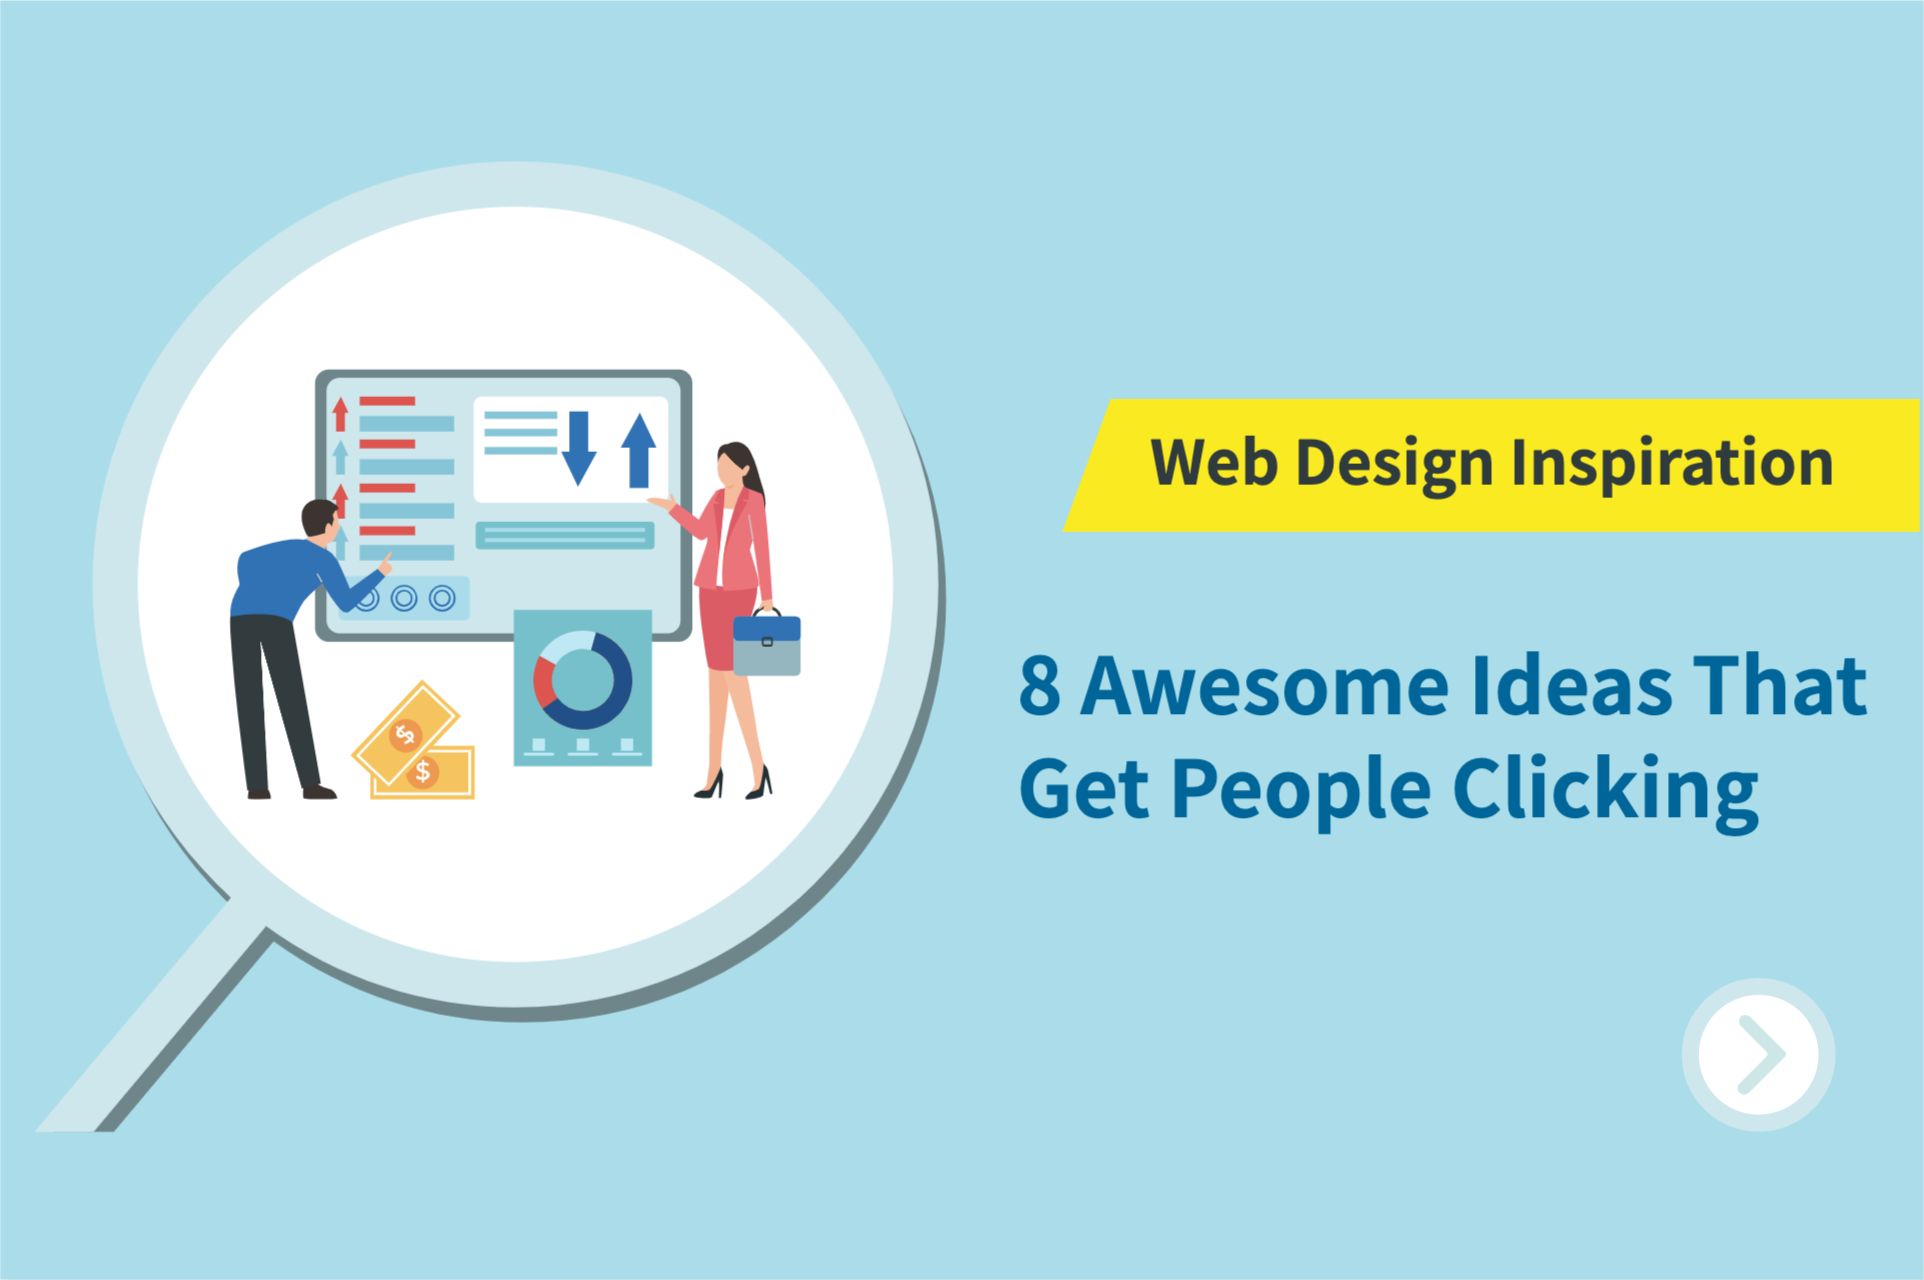 Web Design Inspiration: 8 Awesome Ideas That Get People Clicking